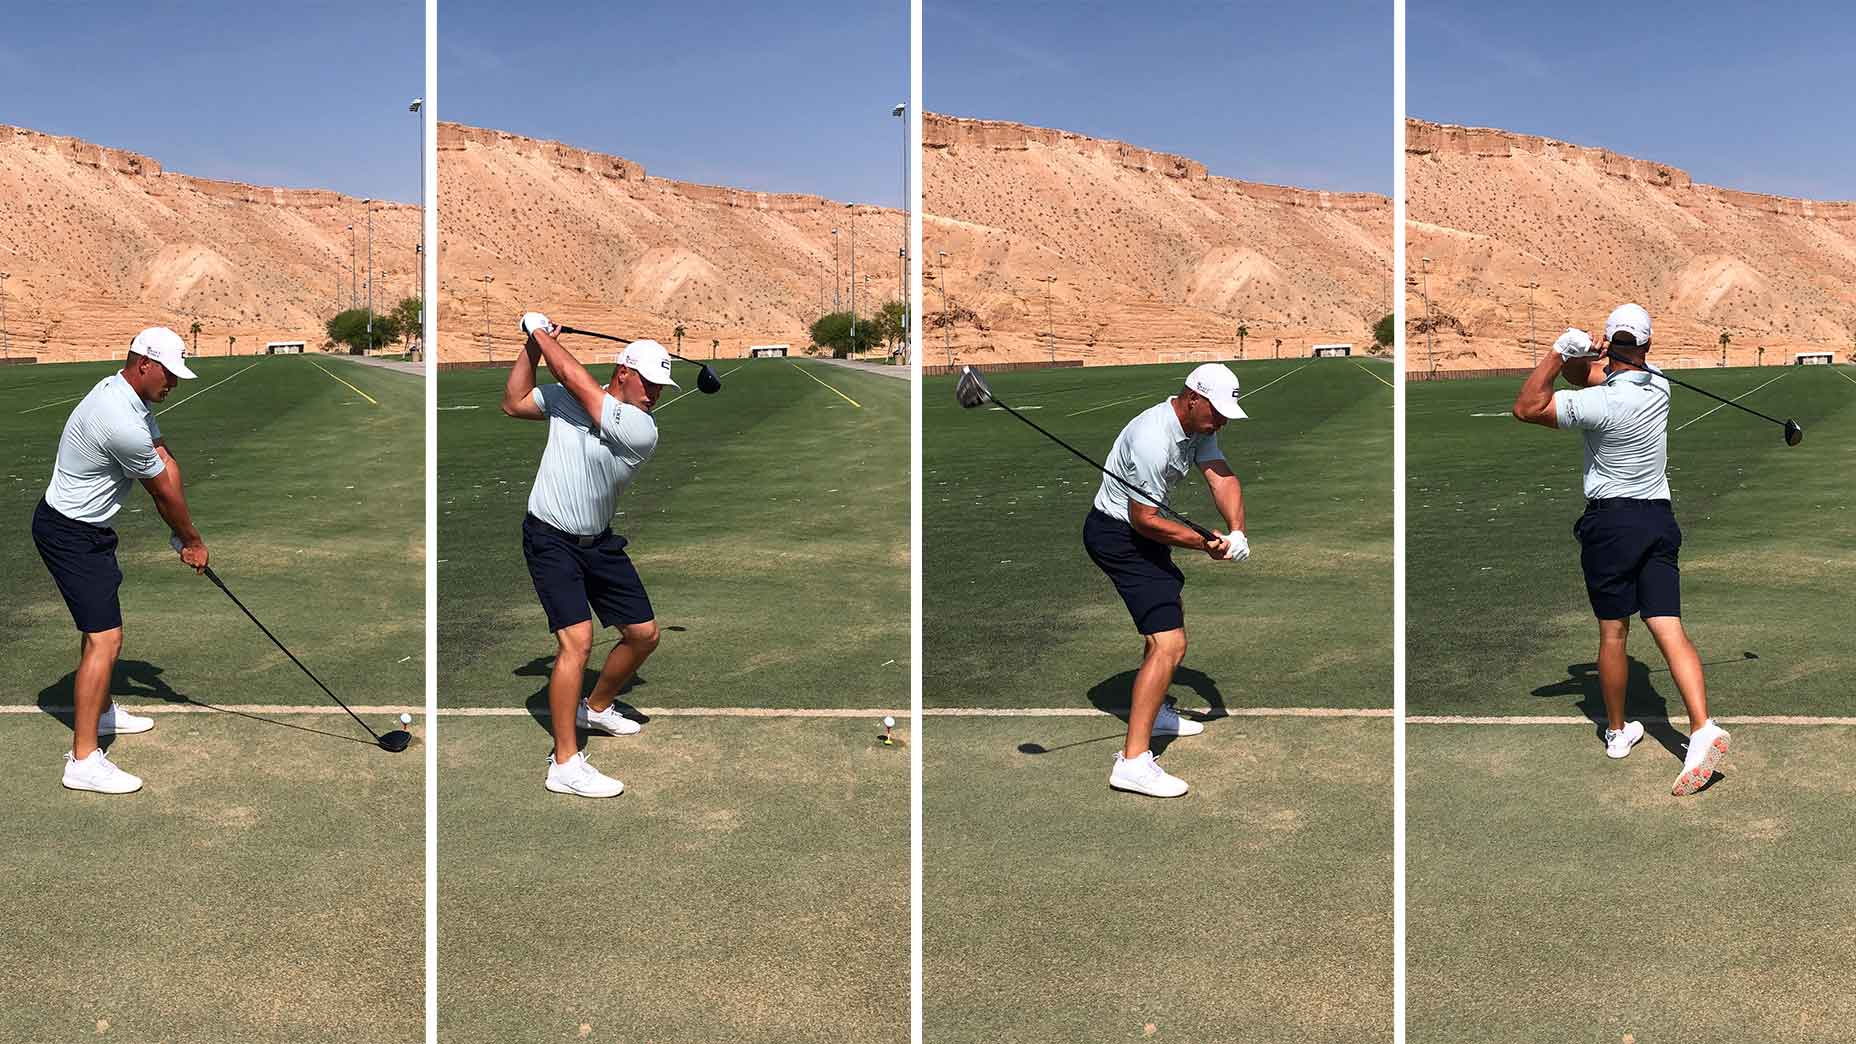 Four pictures of Bryson Dechambeau's swing sequence at the 2021 World Endurance Championships